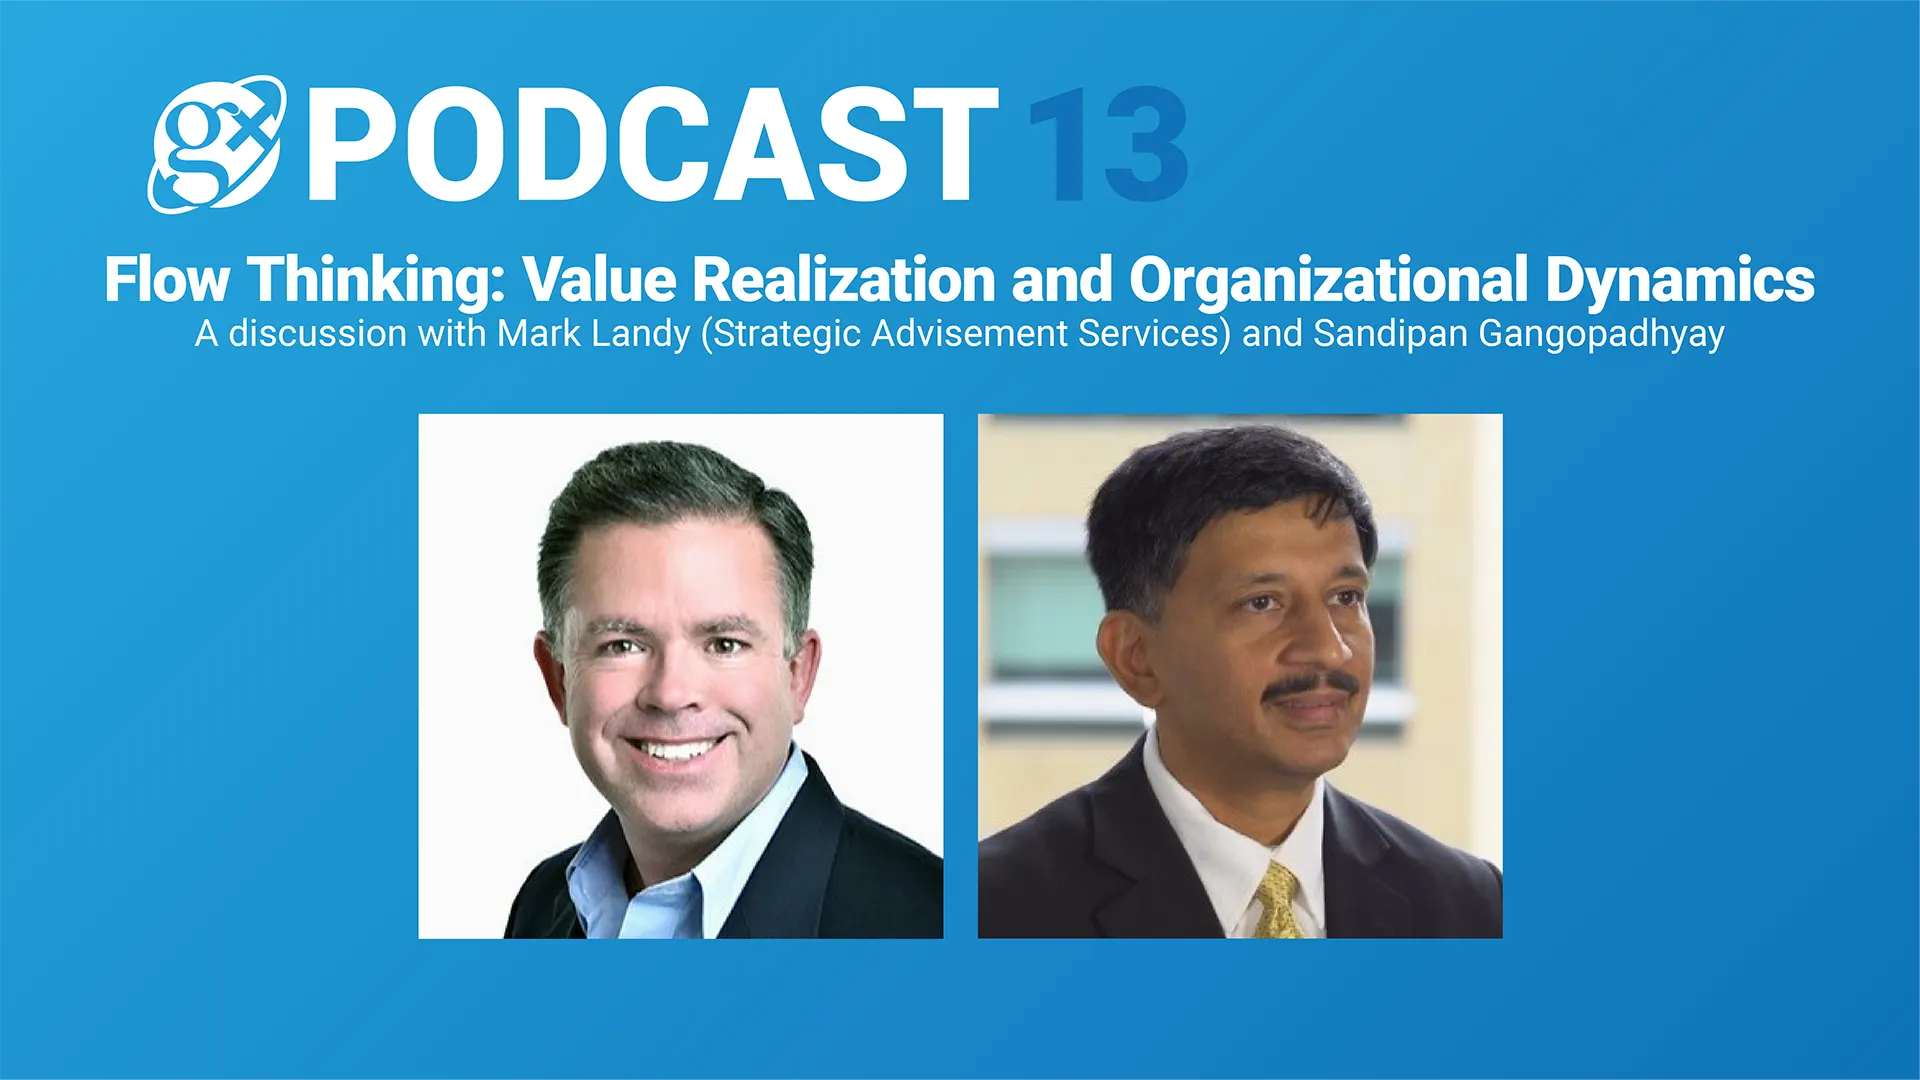 Gx Podcast 13: Flow Thinking: Value Realization and Organizational Dynamics